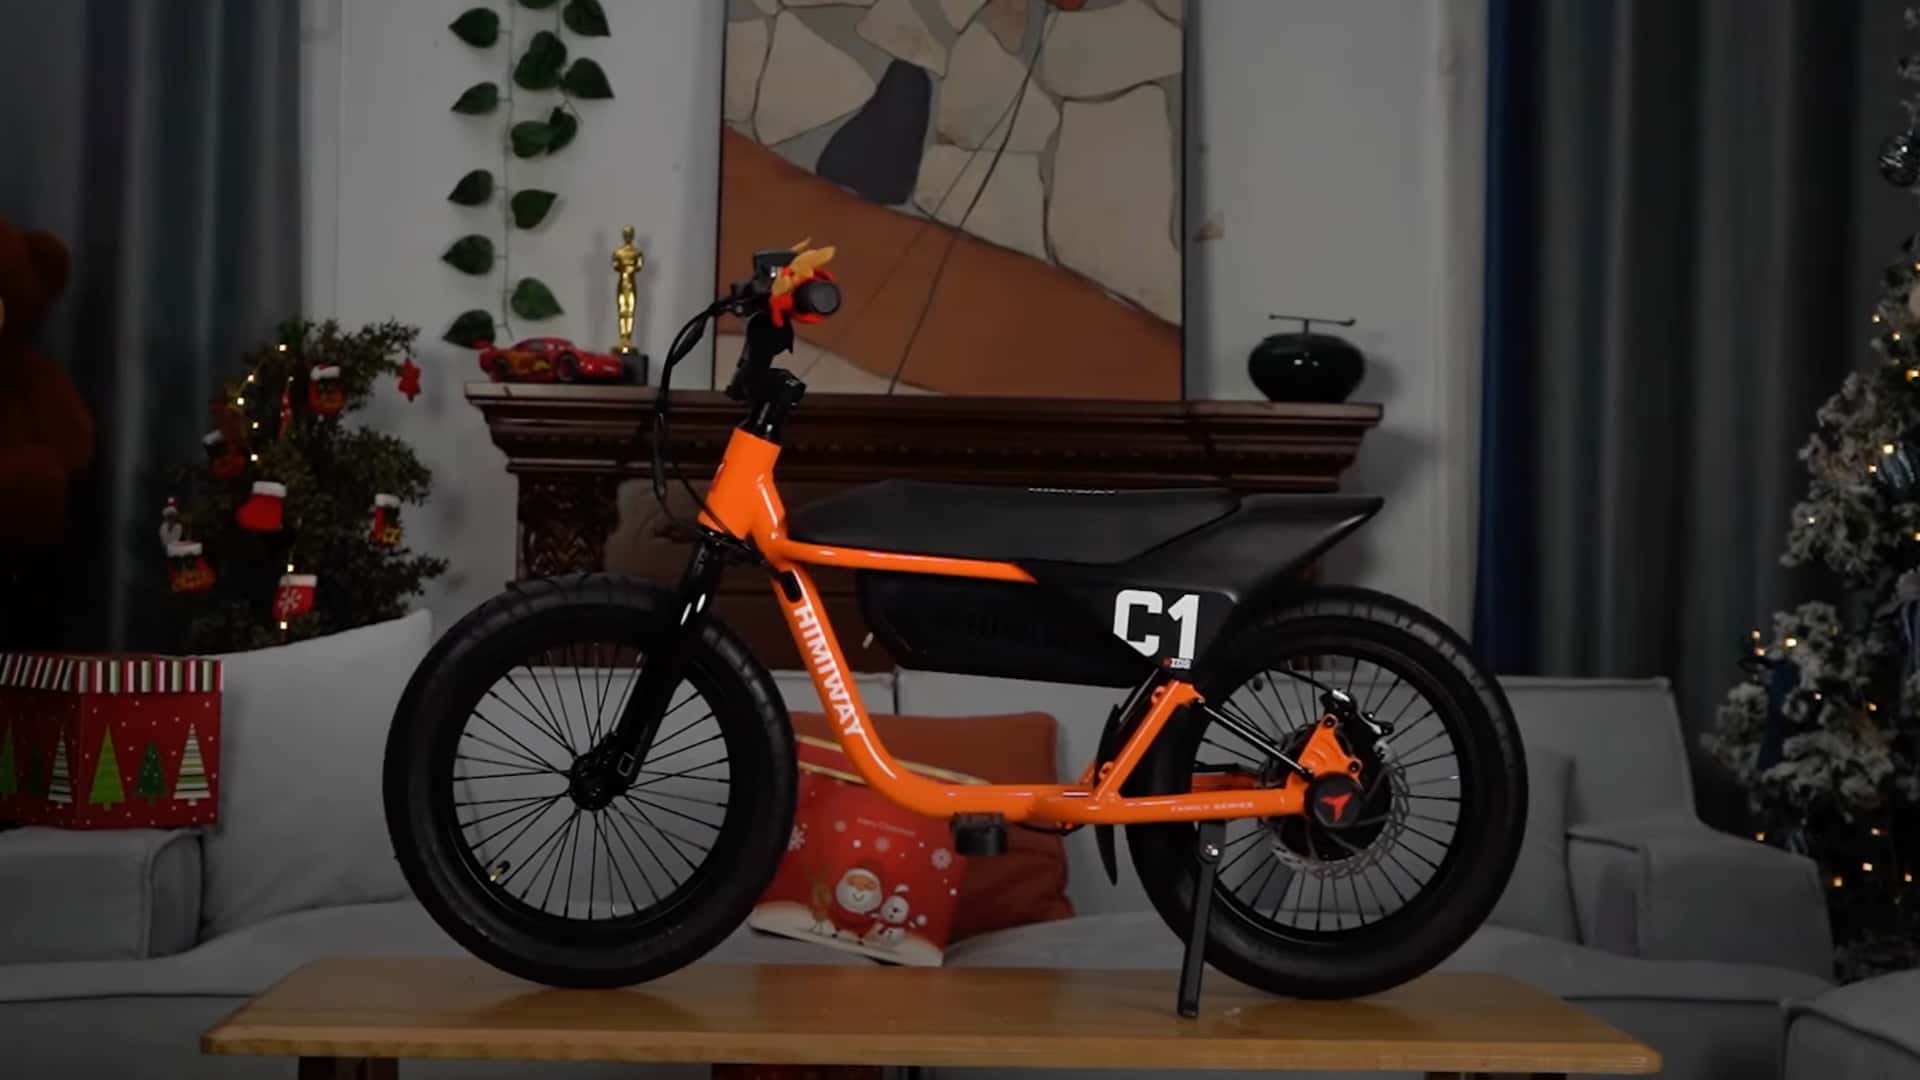 check-out-himiway-s-new-c1-electric-bike-made-for-kids